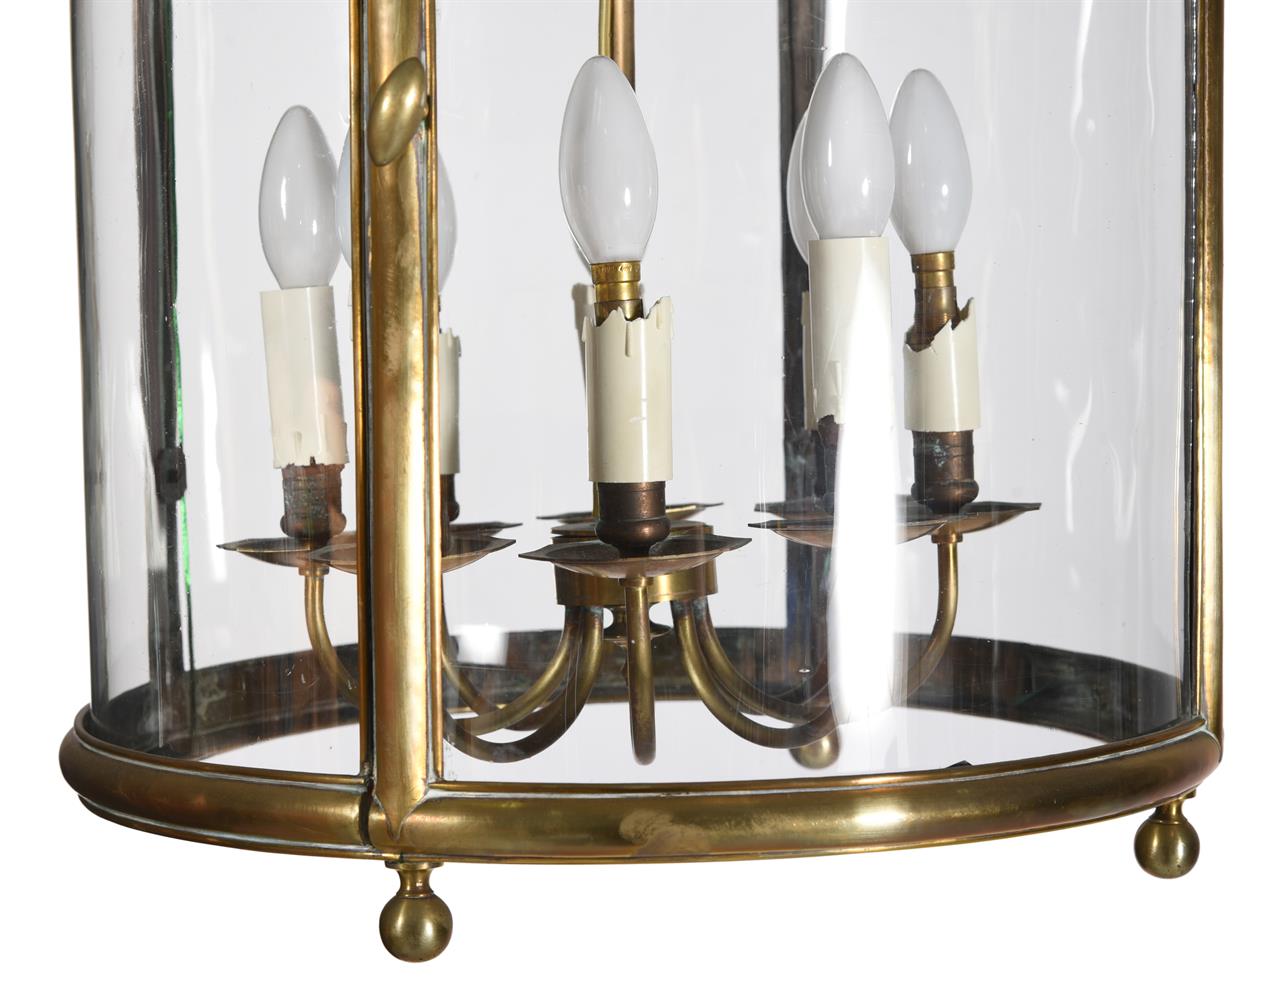 A LARGE BRASS AND GLASS DRUM LANTERN LIGHT, IN GEORGE III STYLE, 20TH CENTURY - Image 3 of 4